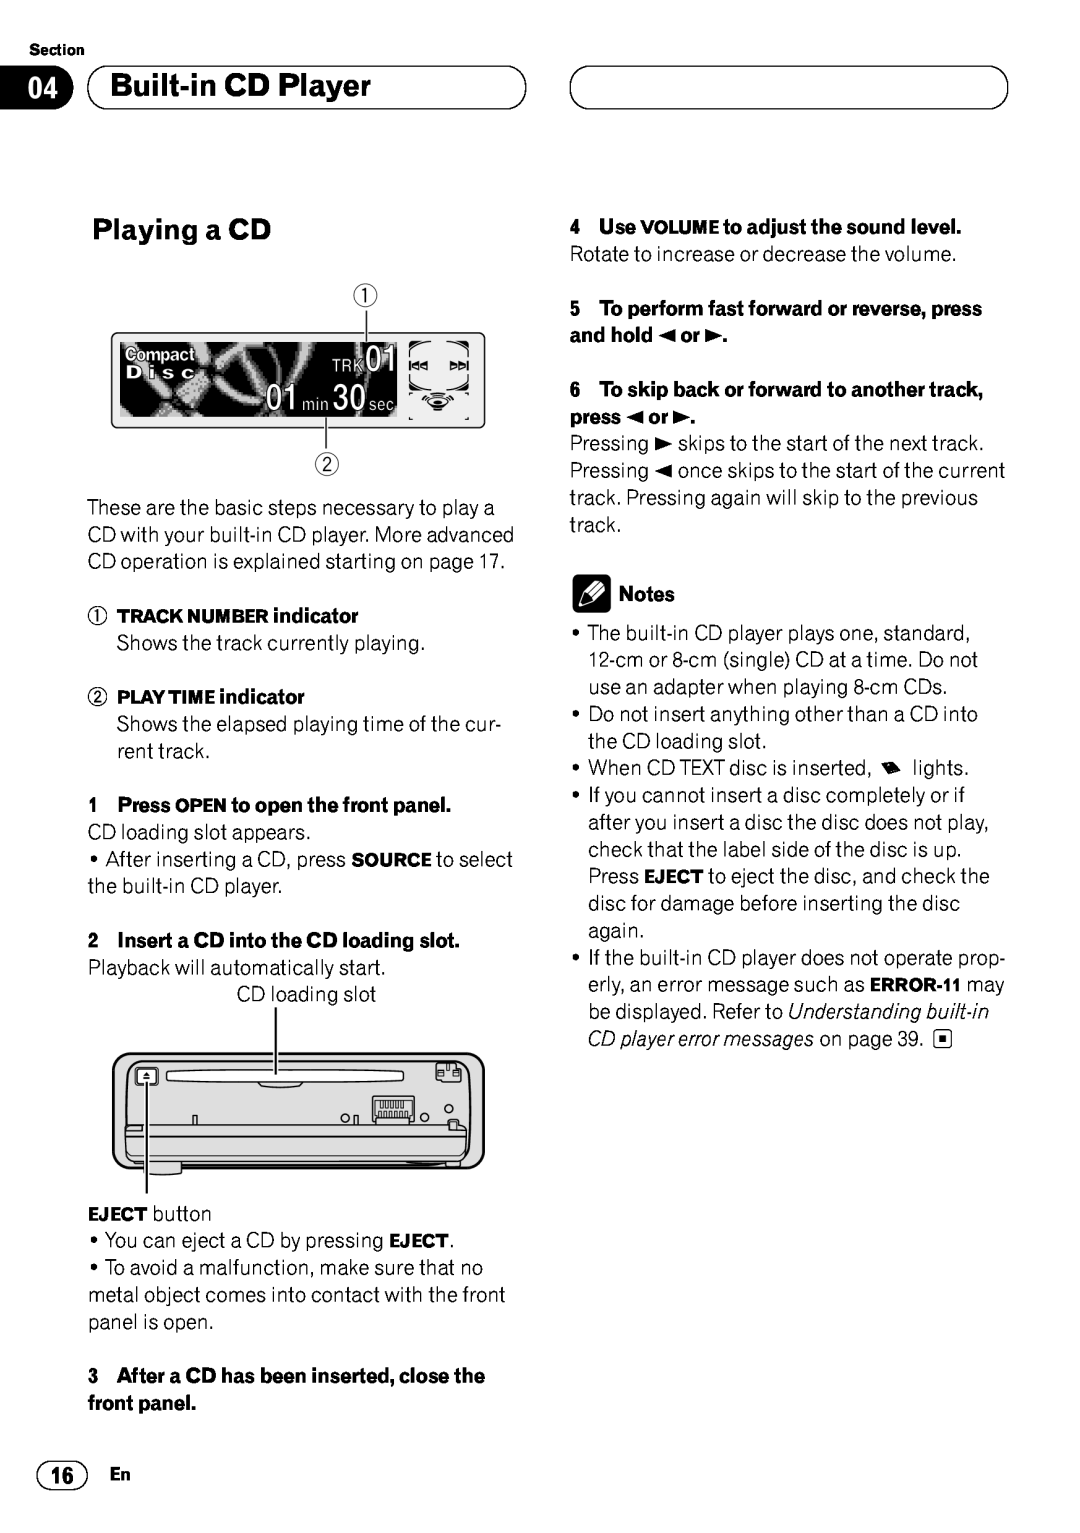 Pioneer DEH-P6400 operation manual 04Built-inCD Player, Playing a CD, Notes 